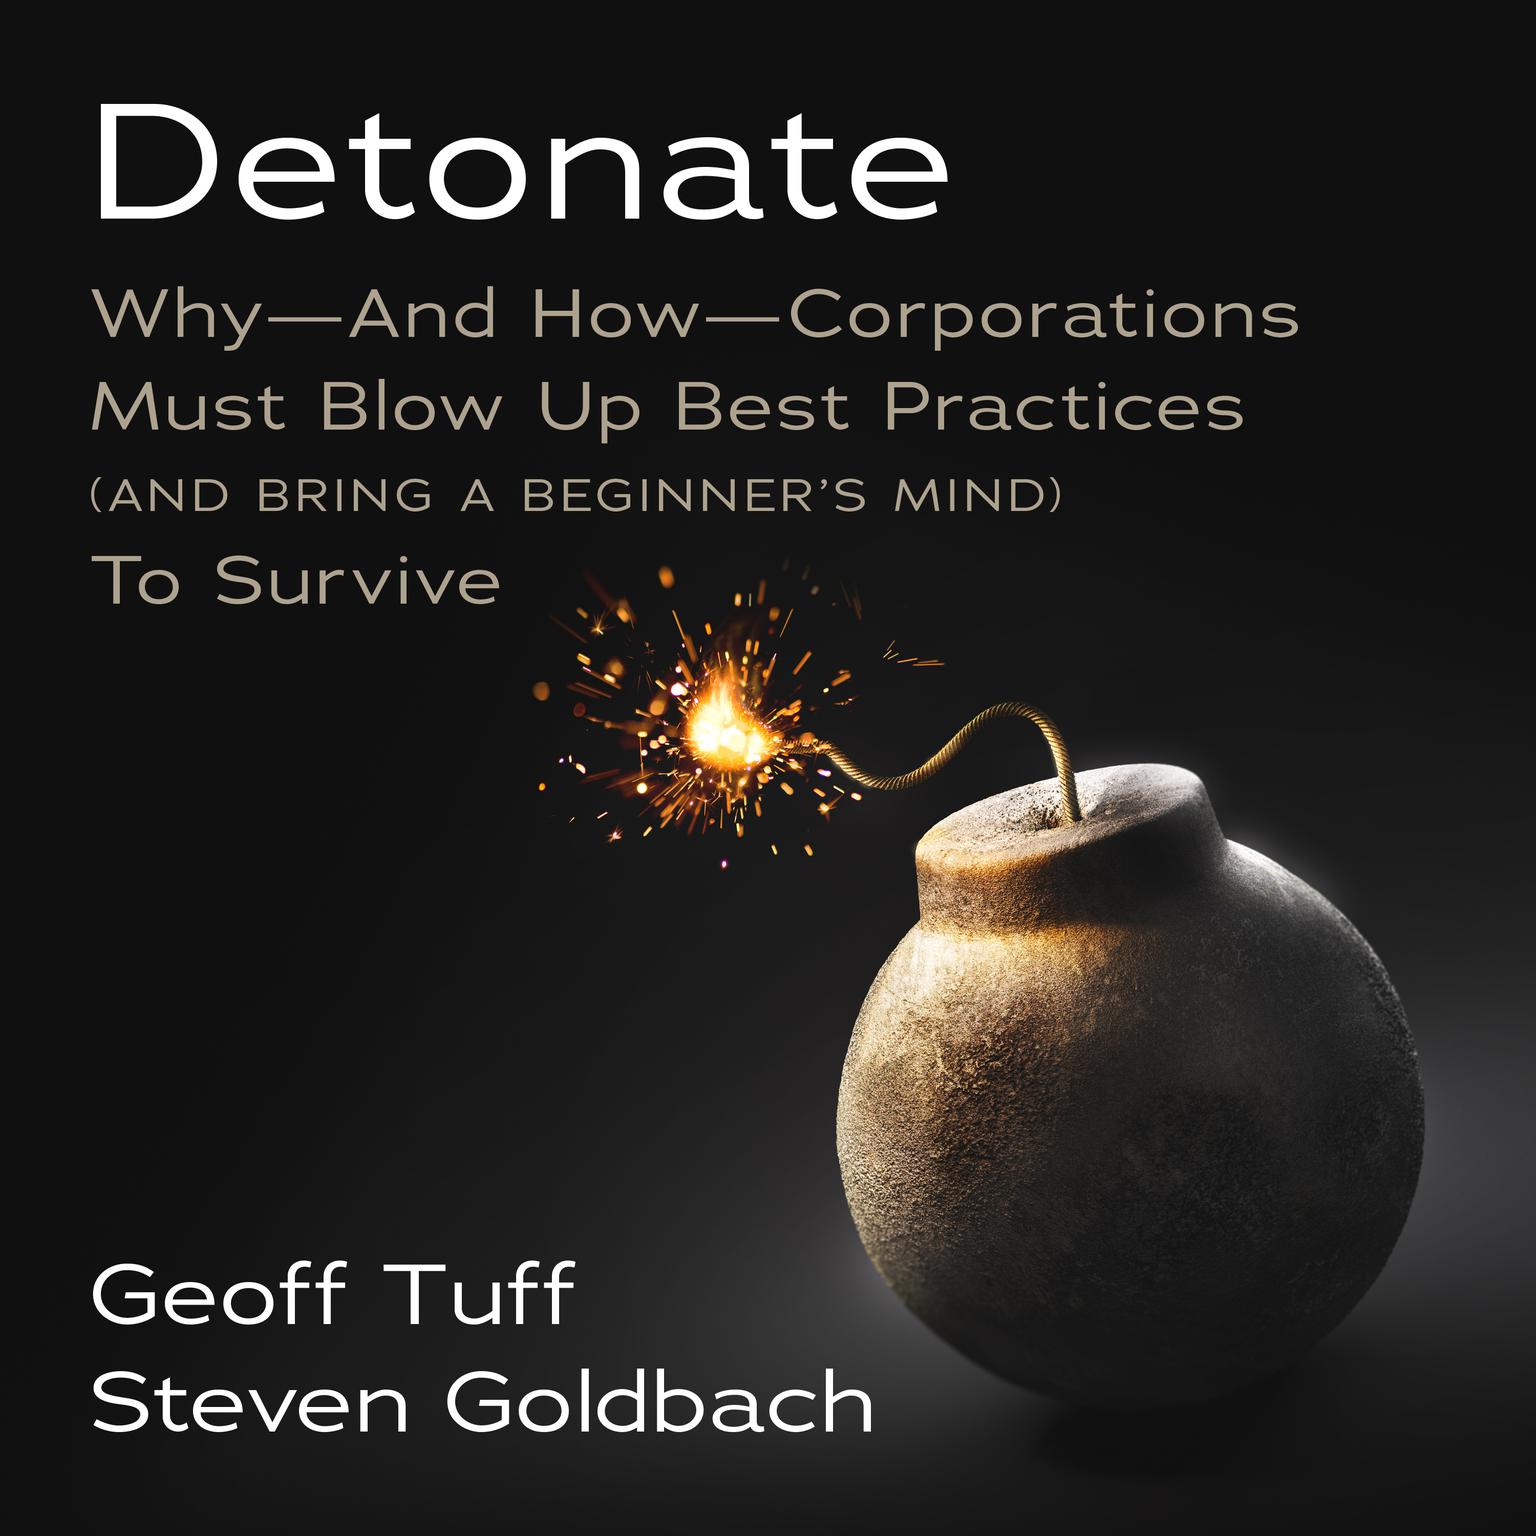 Detonate: Why - And How - Corporations Must Blow Up Best Practices (and bring a beginners mind) To Survive Audiobook, by Geoff Tuff